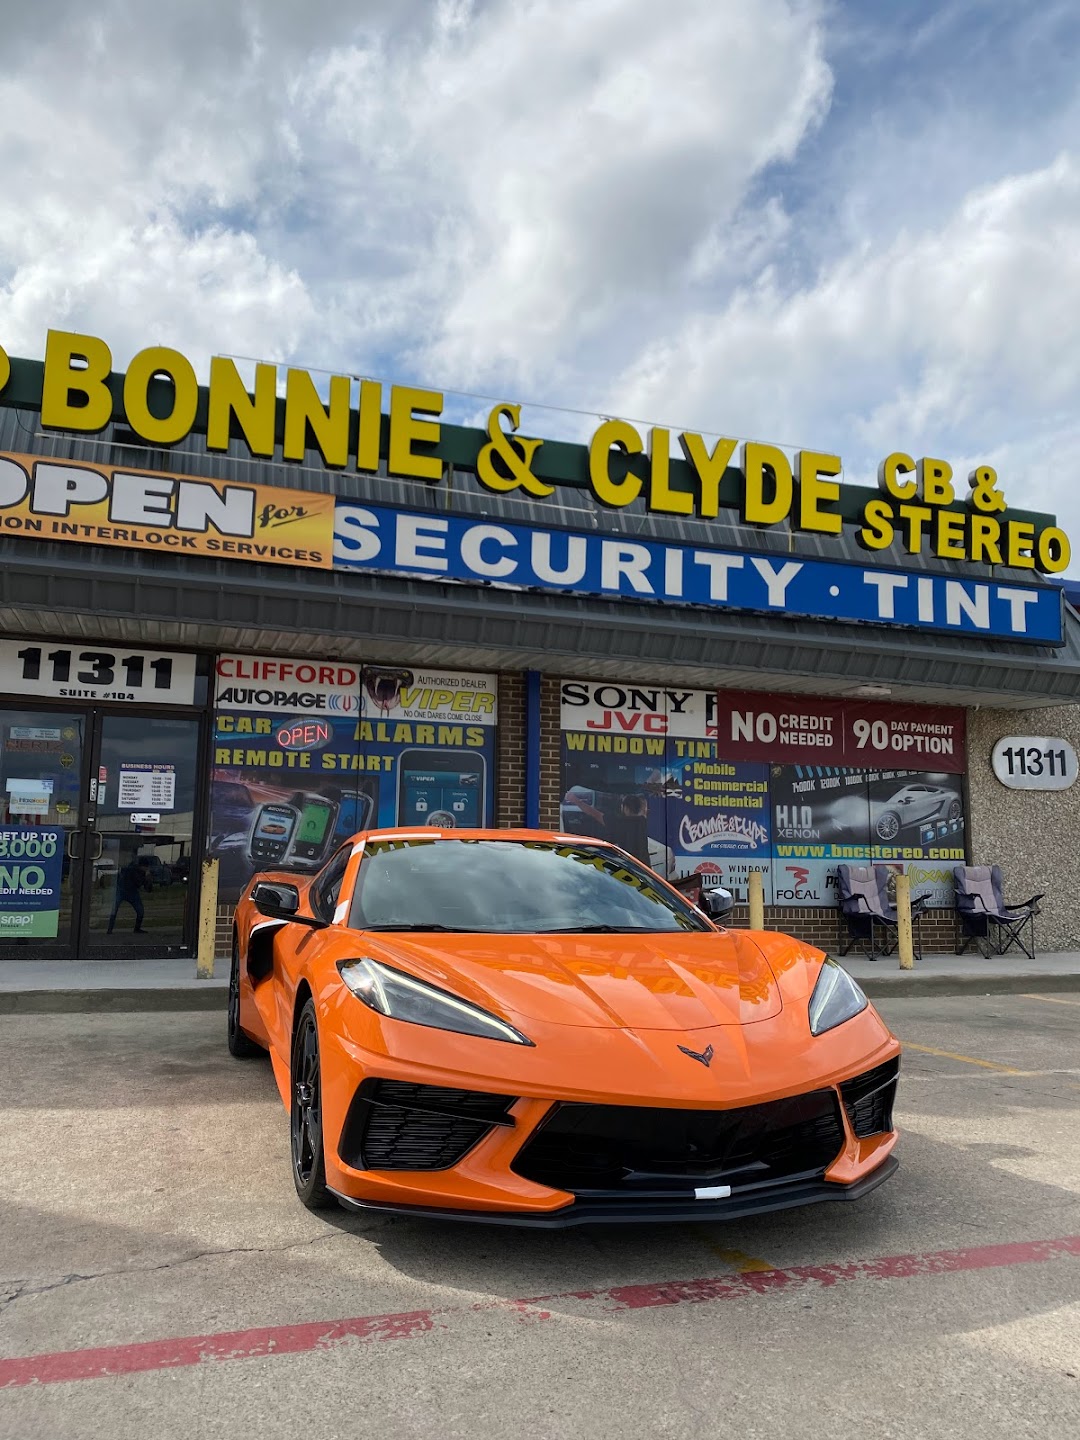 Bonnie & Clyde Car Stereo & Window Tinting